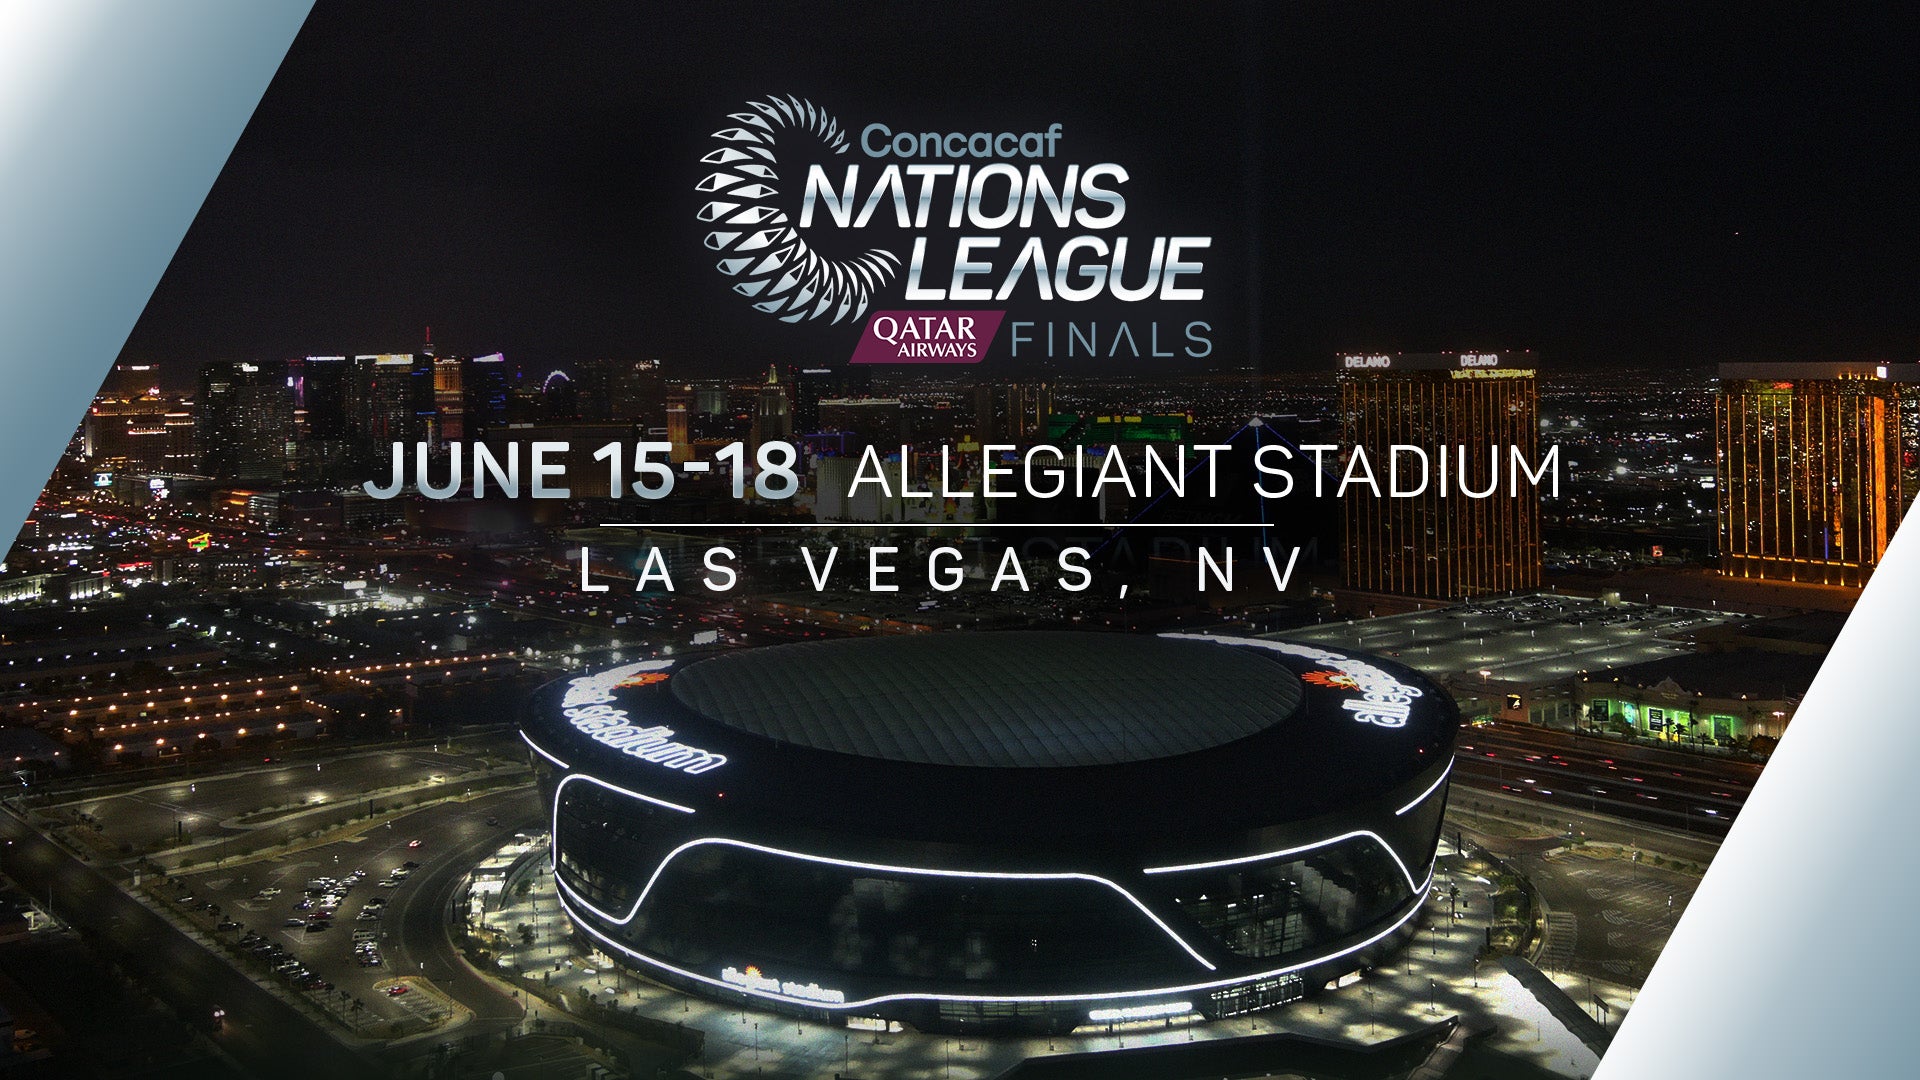 More Info for Las Vegas to host 2022/23 Concacaf Nations League Finals in June